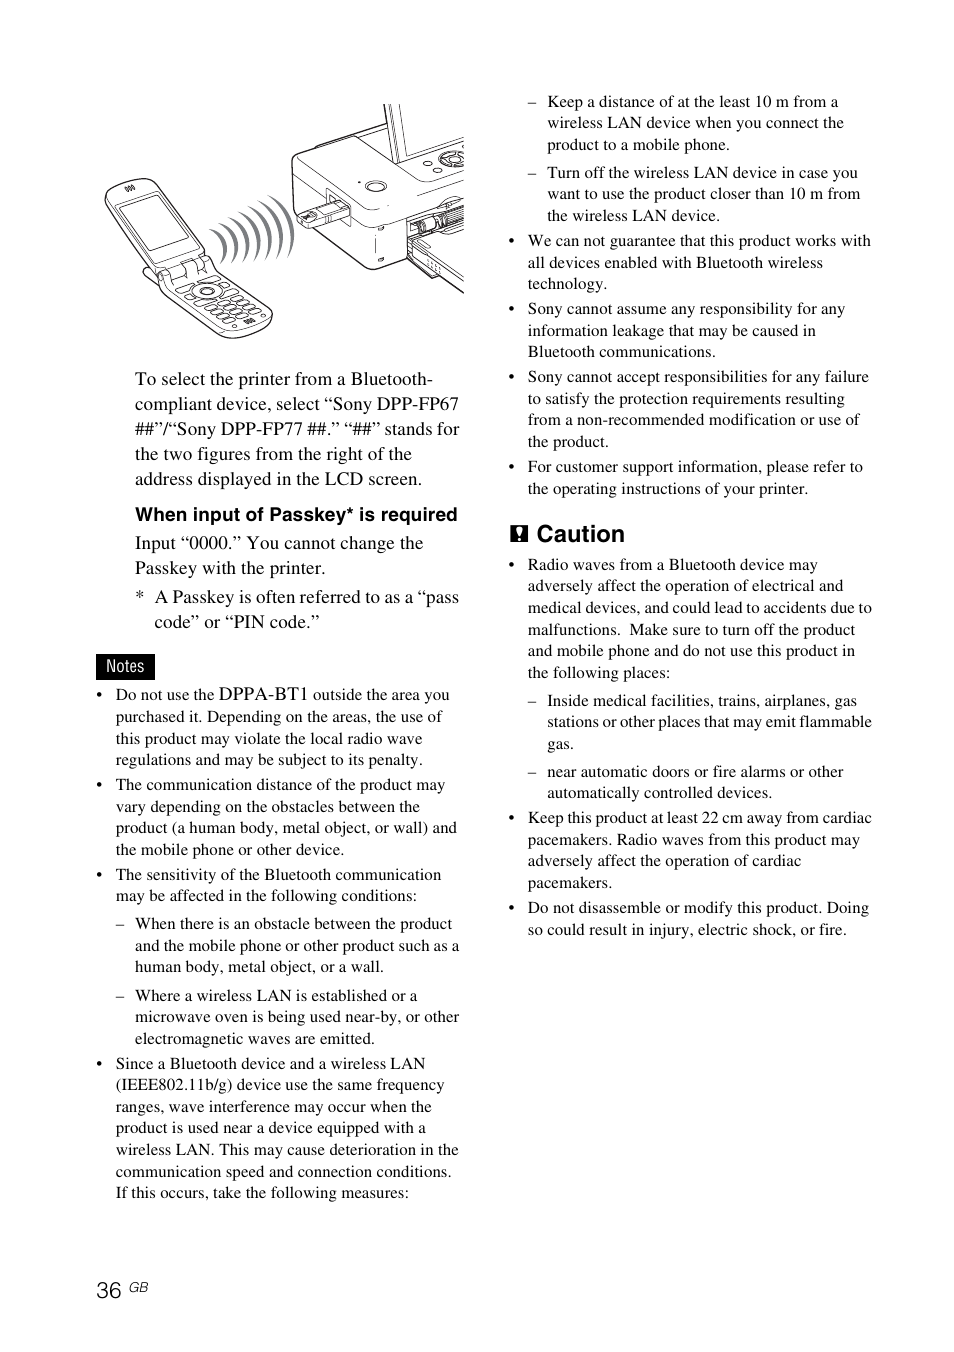 P caution | Sony DPP-FP77 User Manual | Page 36 / 72